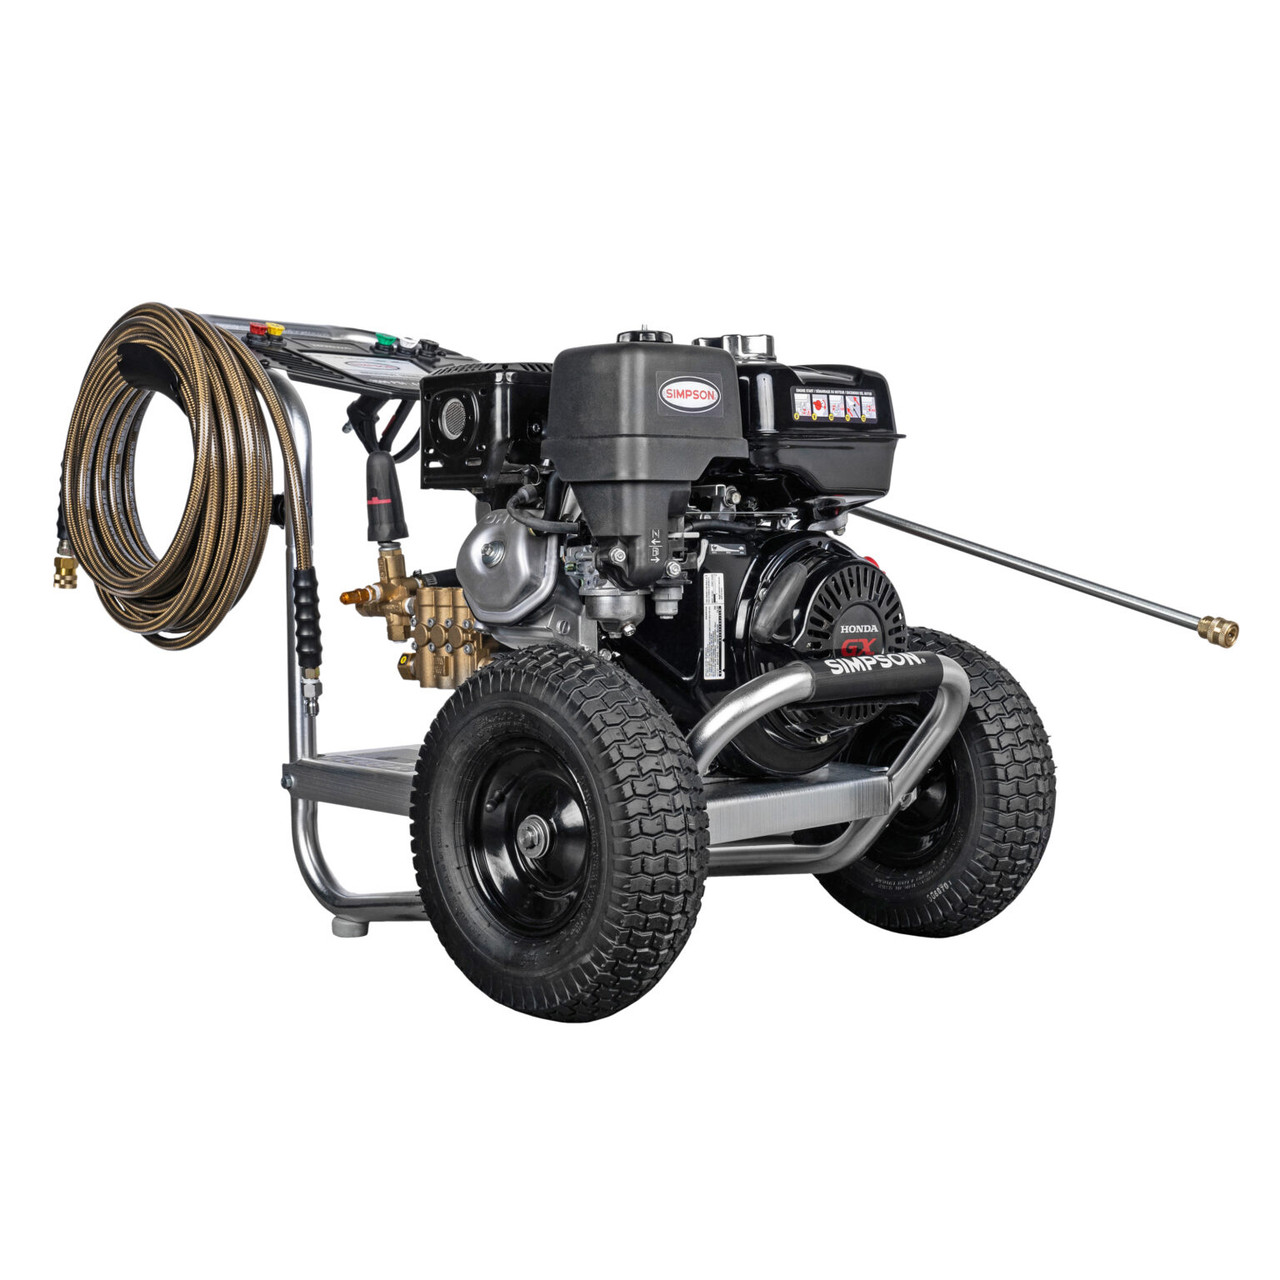 4400 PSI at 4.0 GPM HONDA GX390 with AAA Triplex Plunger Pump Cold Water Gas Professional Pressure Washer IS61028